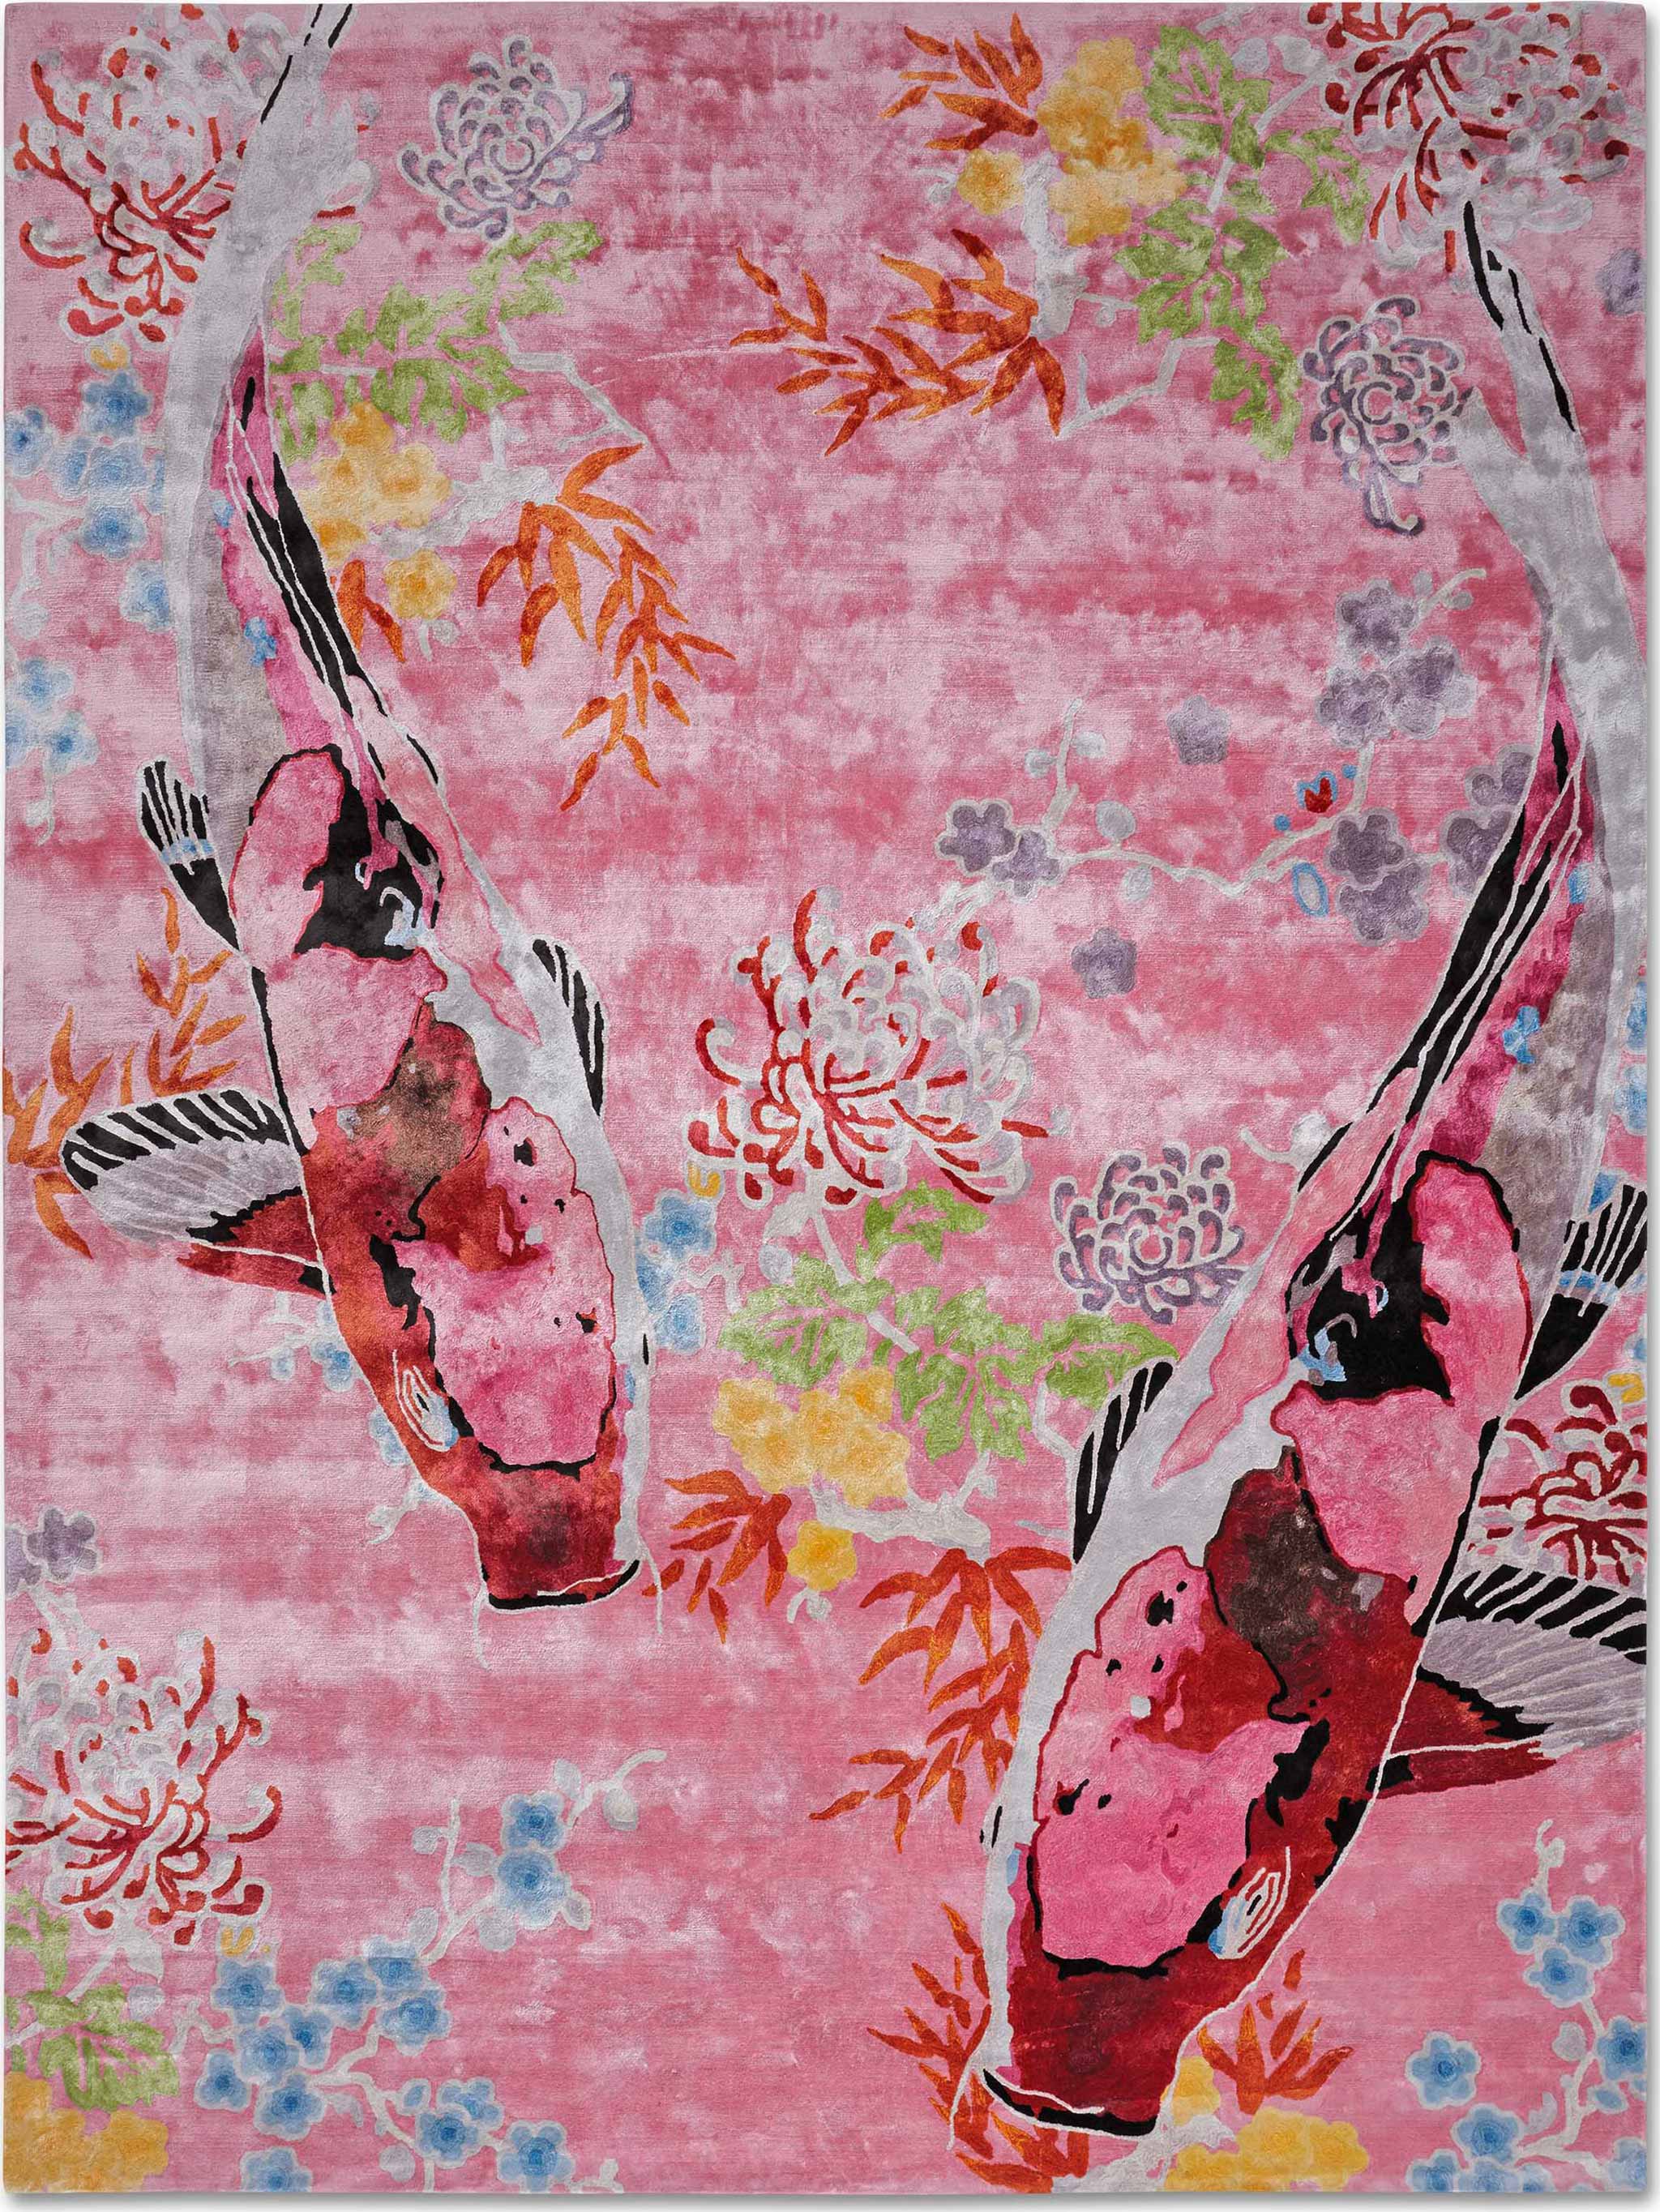 Koi 2 shown in colour Pink by Rug Star by Jürgen Dahlmanns - 100% viscose tufted in China. | Image courtesy of Rug Star.